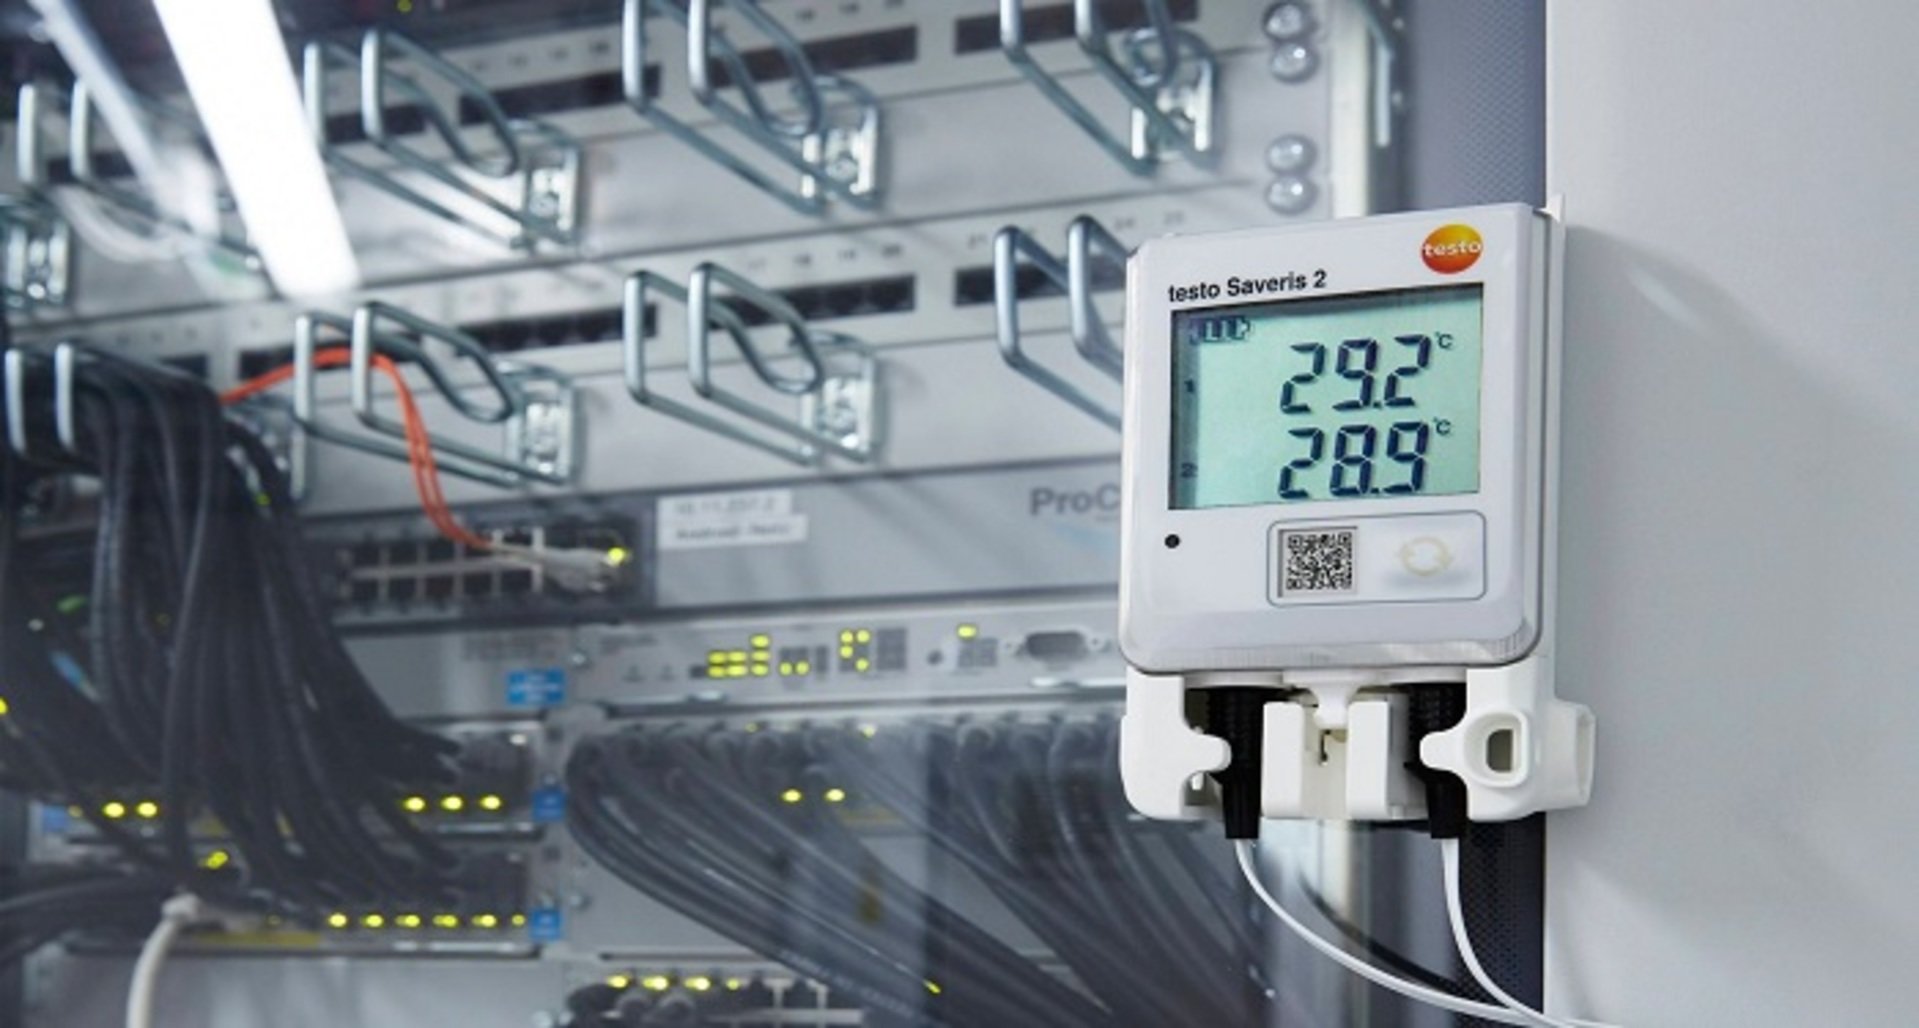 How to Monitor Server Room Temperature and Environmental Conditions - gizmo